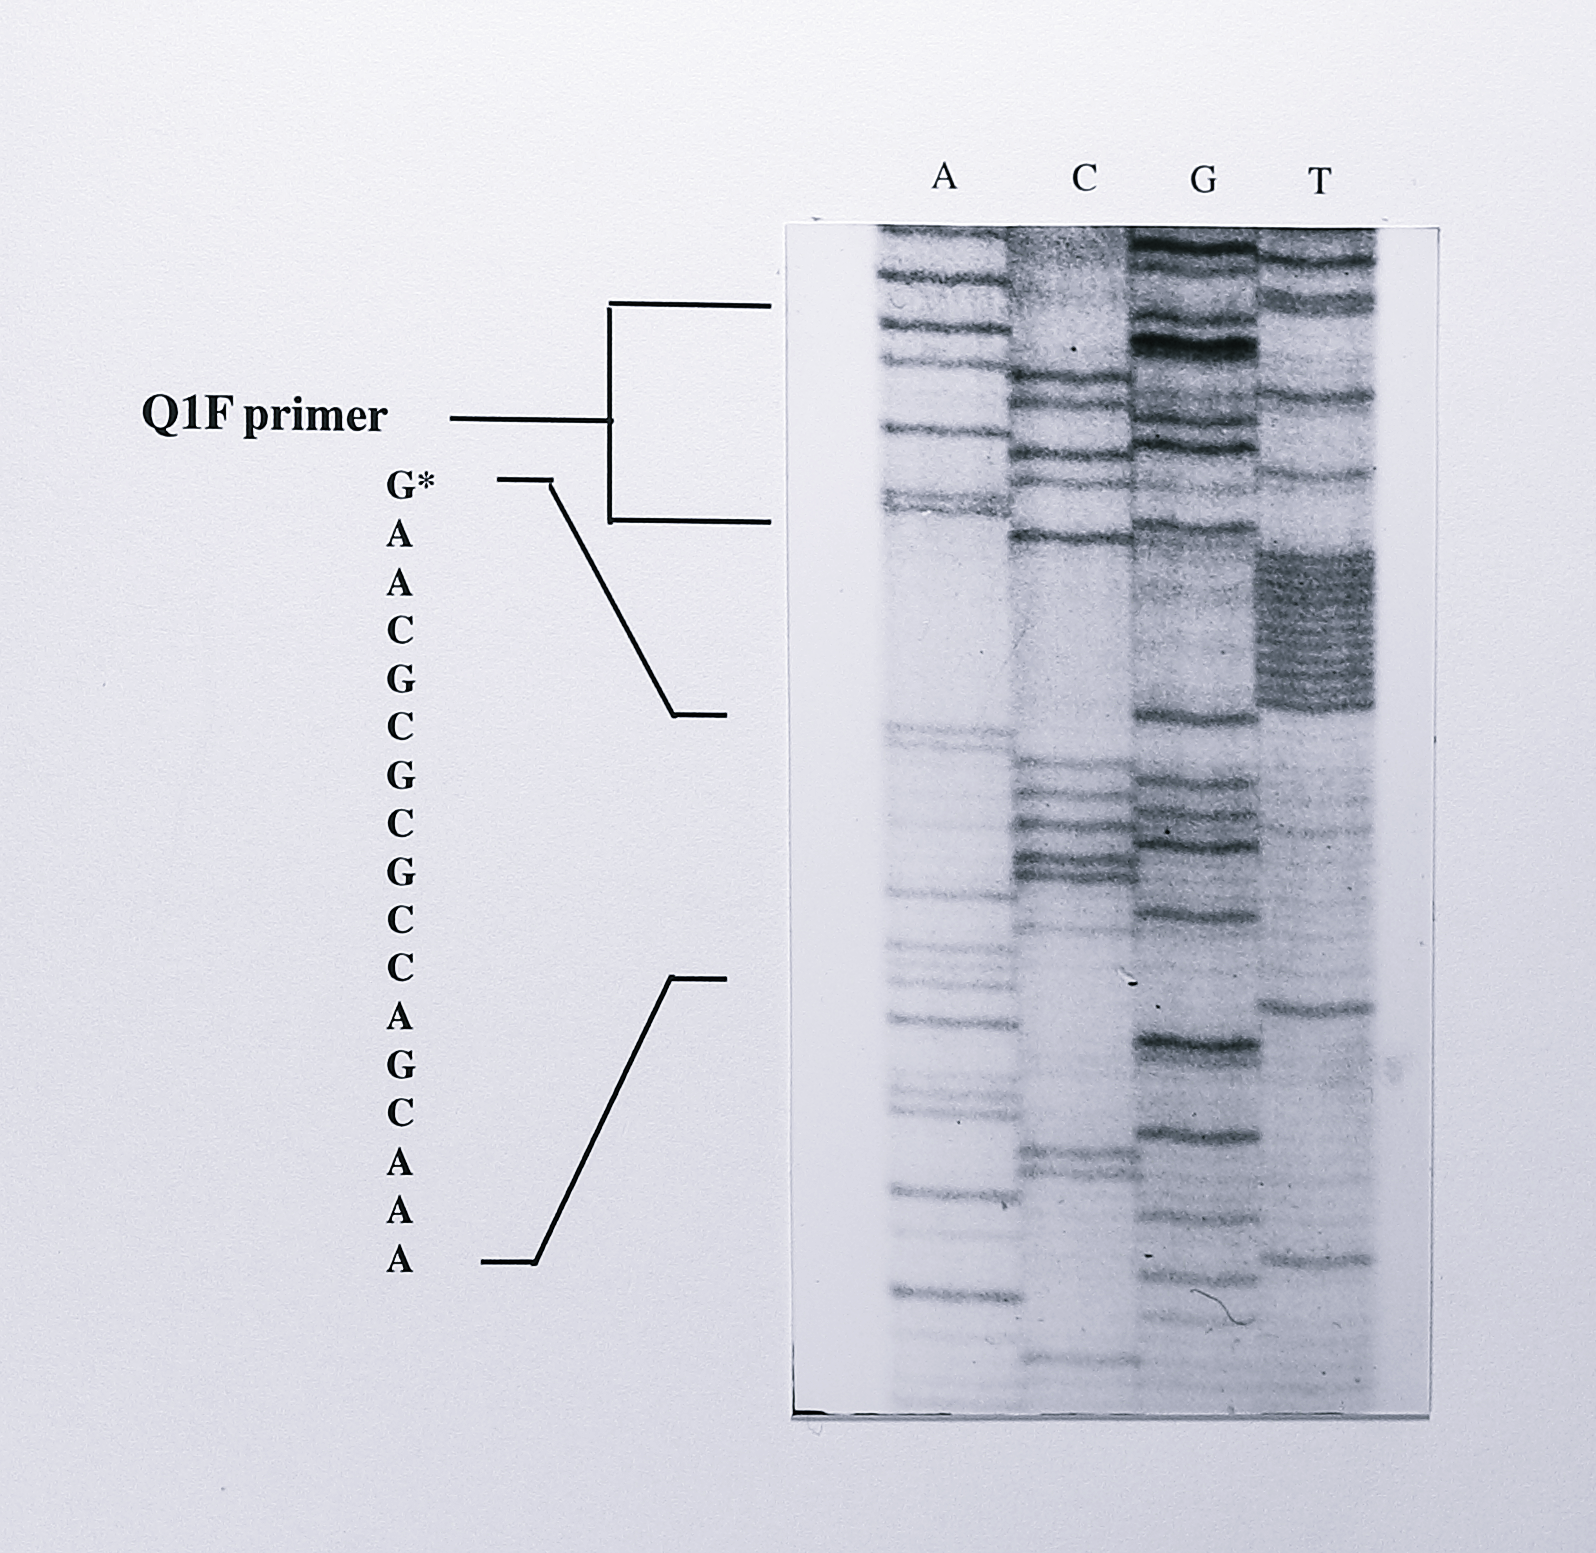 Sequence of the cloned PCR product synthesised from _nirS_ mRNA by 5'-RACE. The PCR product generated using the primers Q1F and 228R (see text for details) was cloned into the vector pGEM-T (Figure 7.9) and sequenced using the M13F universal primer. The Q1F primer can be read from the sequence and is followed by 11 T residues, representing the poly-A tail that was added to the cDNA following its synthesis from the _nirS_ mRNA. The residue immediately following the poly-T sequence is a G residue (asterisked). This residue indicates the 5'-end of the mRNA and is the same residue as that identified by primer extension.